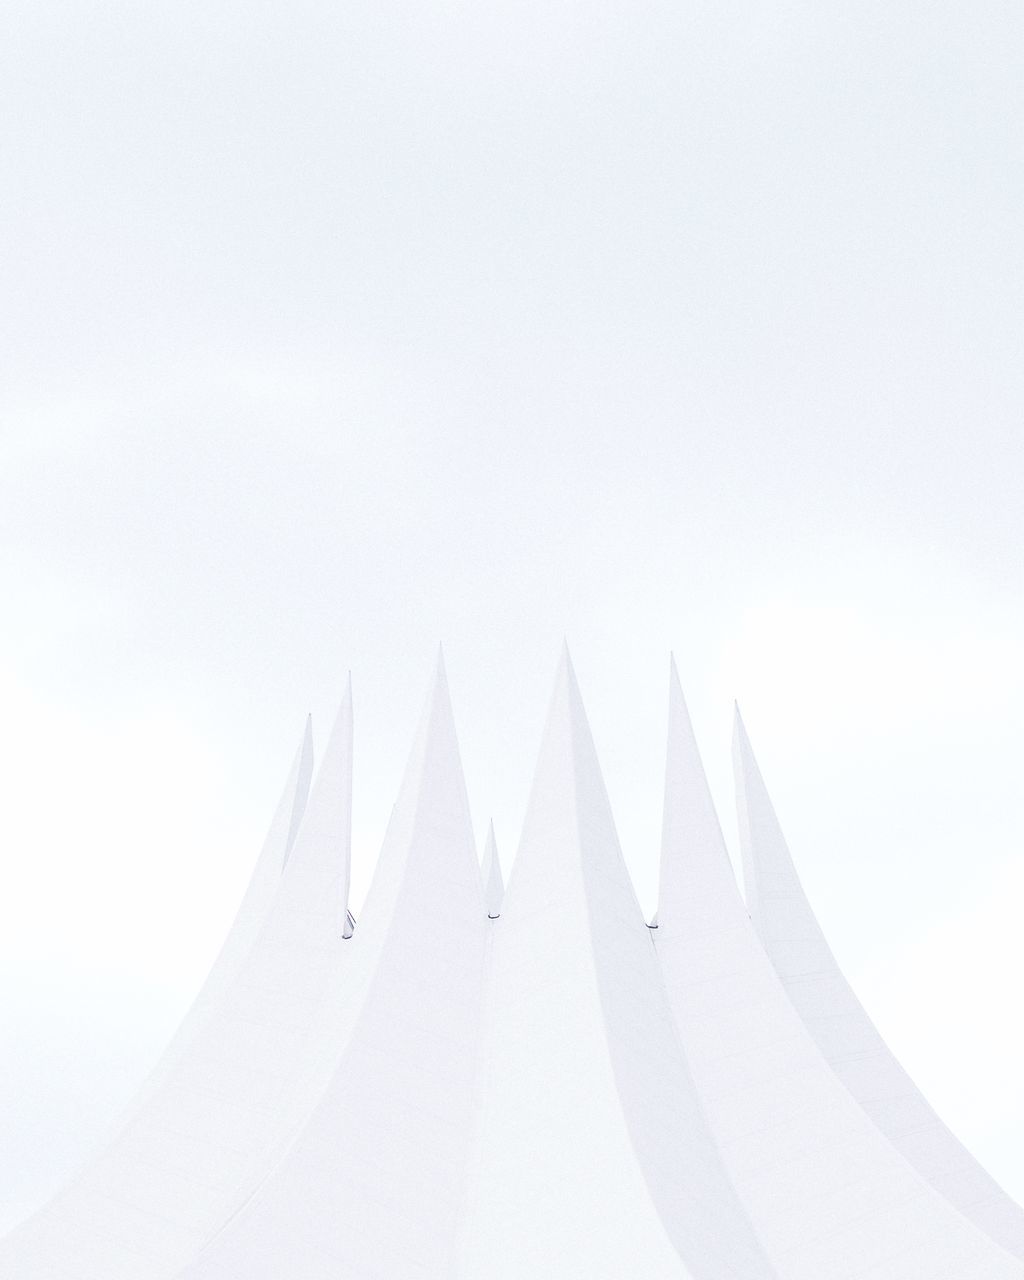 copy space, sky, no people, white color, low angle view, day, nature, clear sky, pattern, architecture, outdoors, studio shot, tent, white, design, built structure, shape, mode of transportation, high section